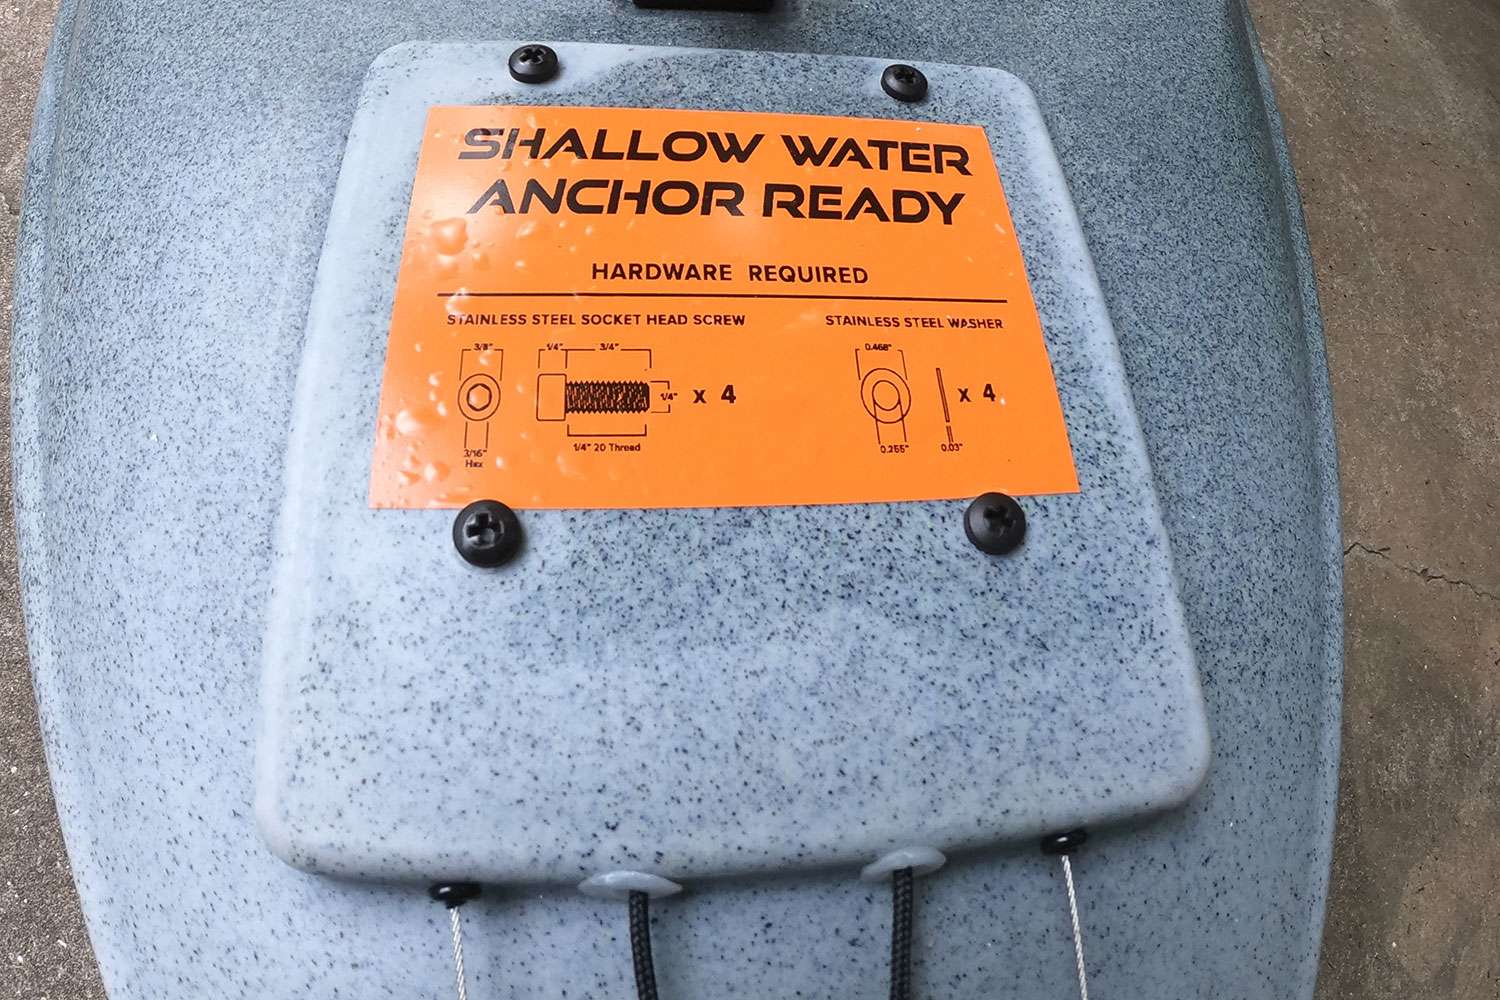 Also new on the Predator is a shallow-water-anchor ready plate that will make for an easy install.